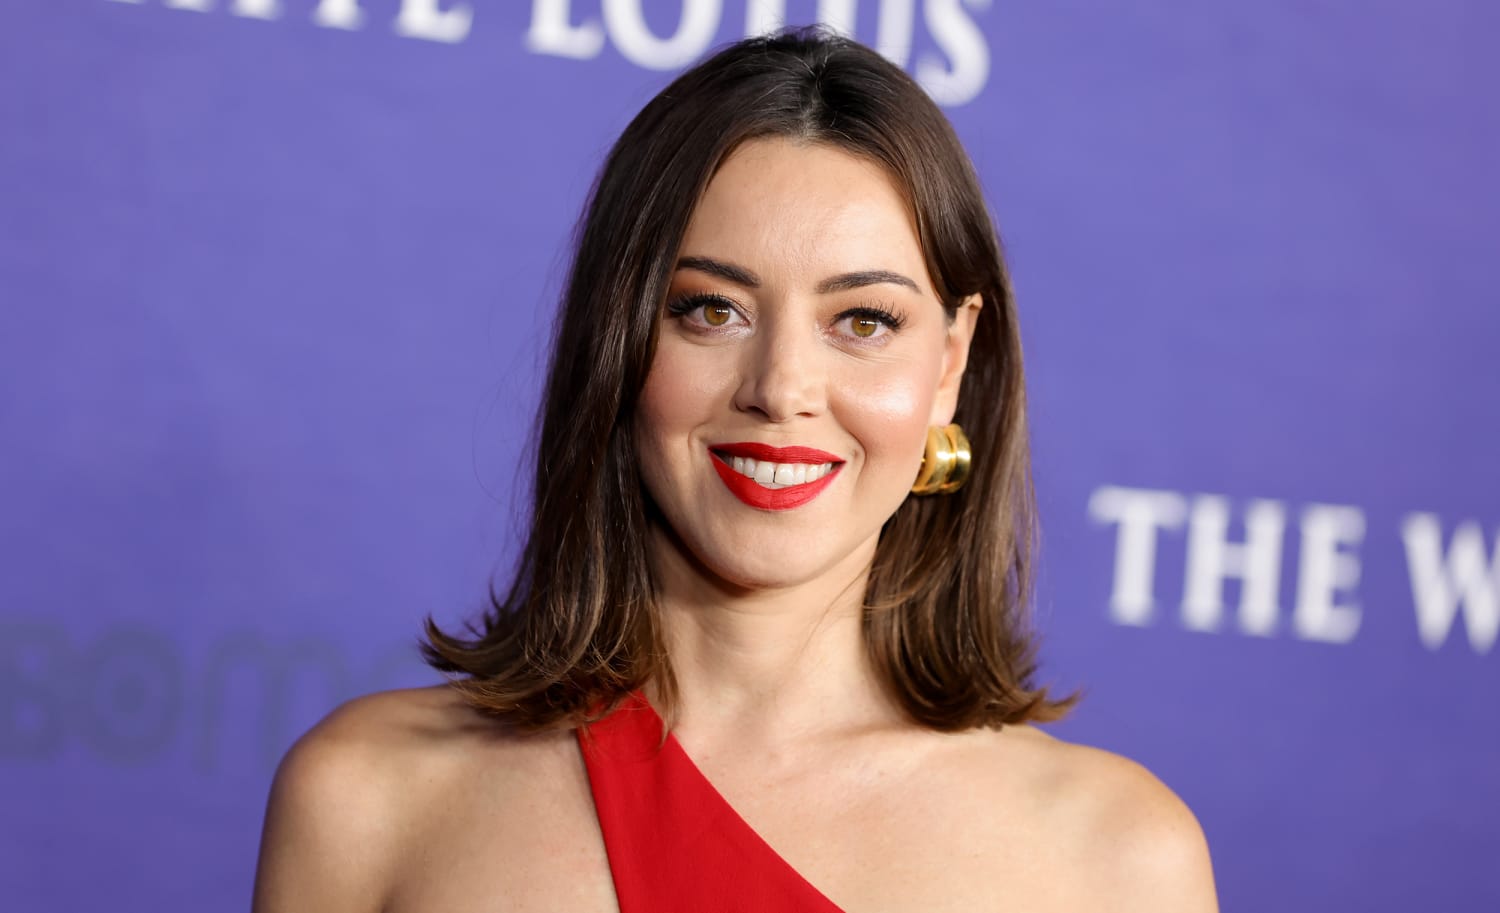 Aubrey Plaza Just Went Blond! Check Out Her Chic New Look